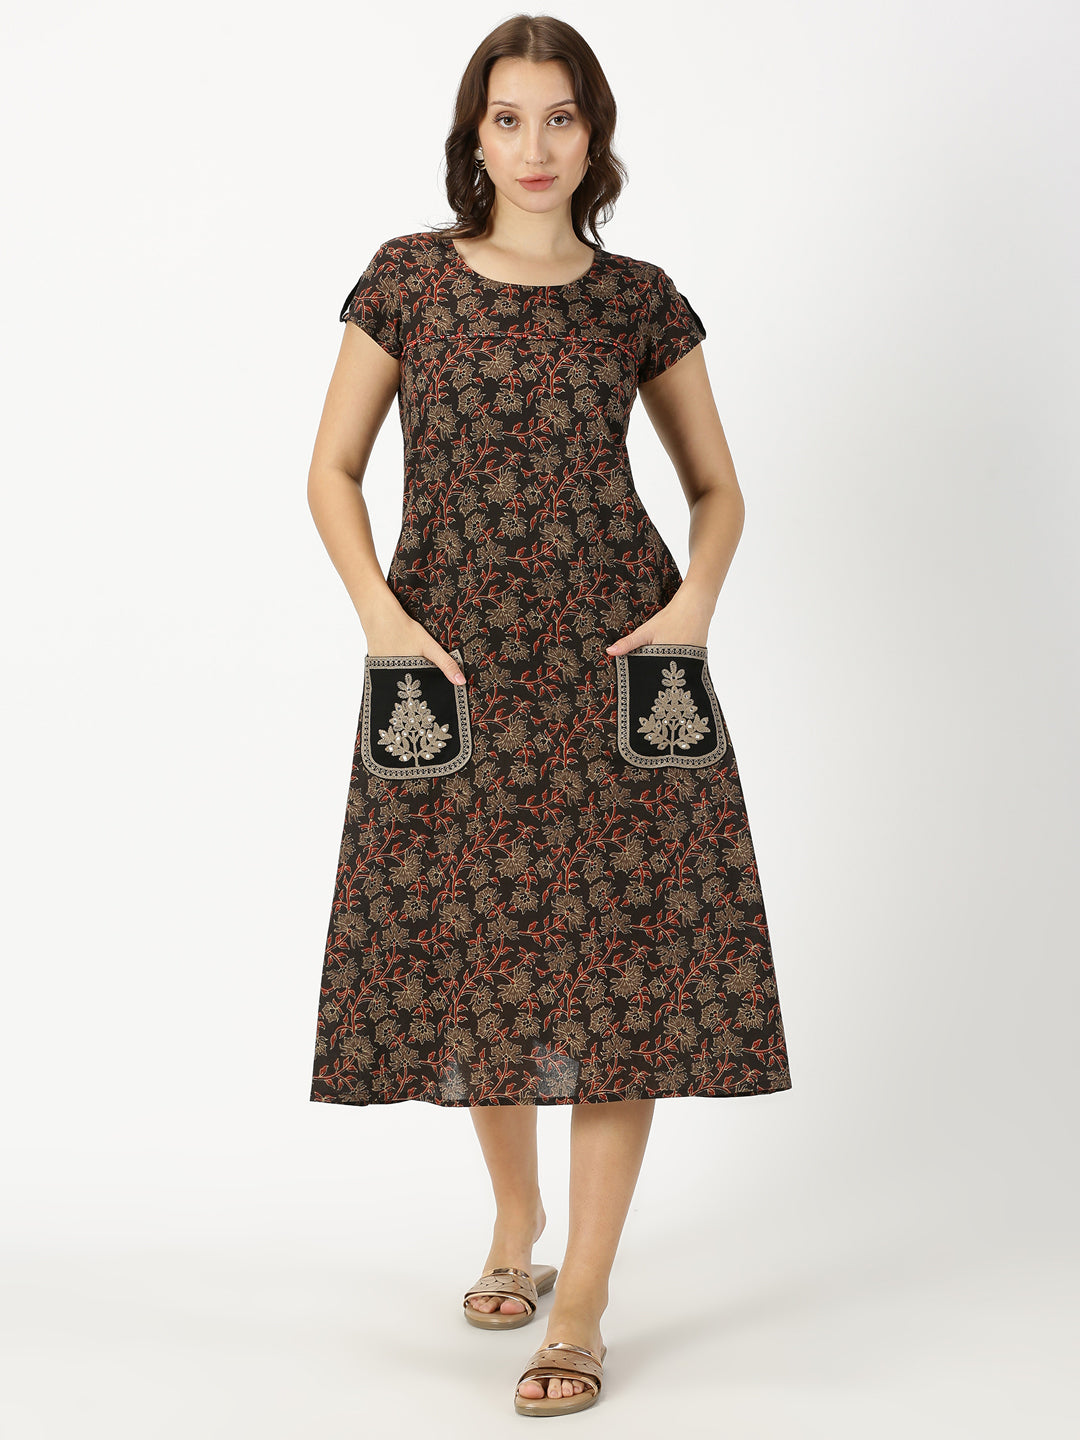 Black Ethnic Floral Print Dress with Embroidered Patch Pockets